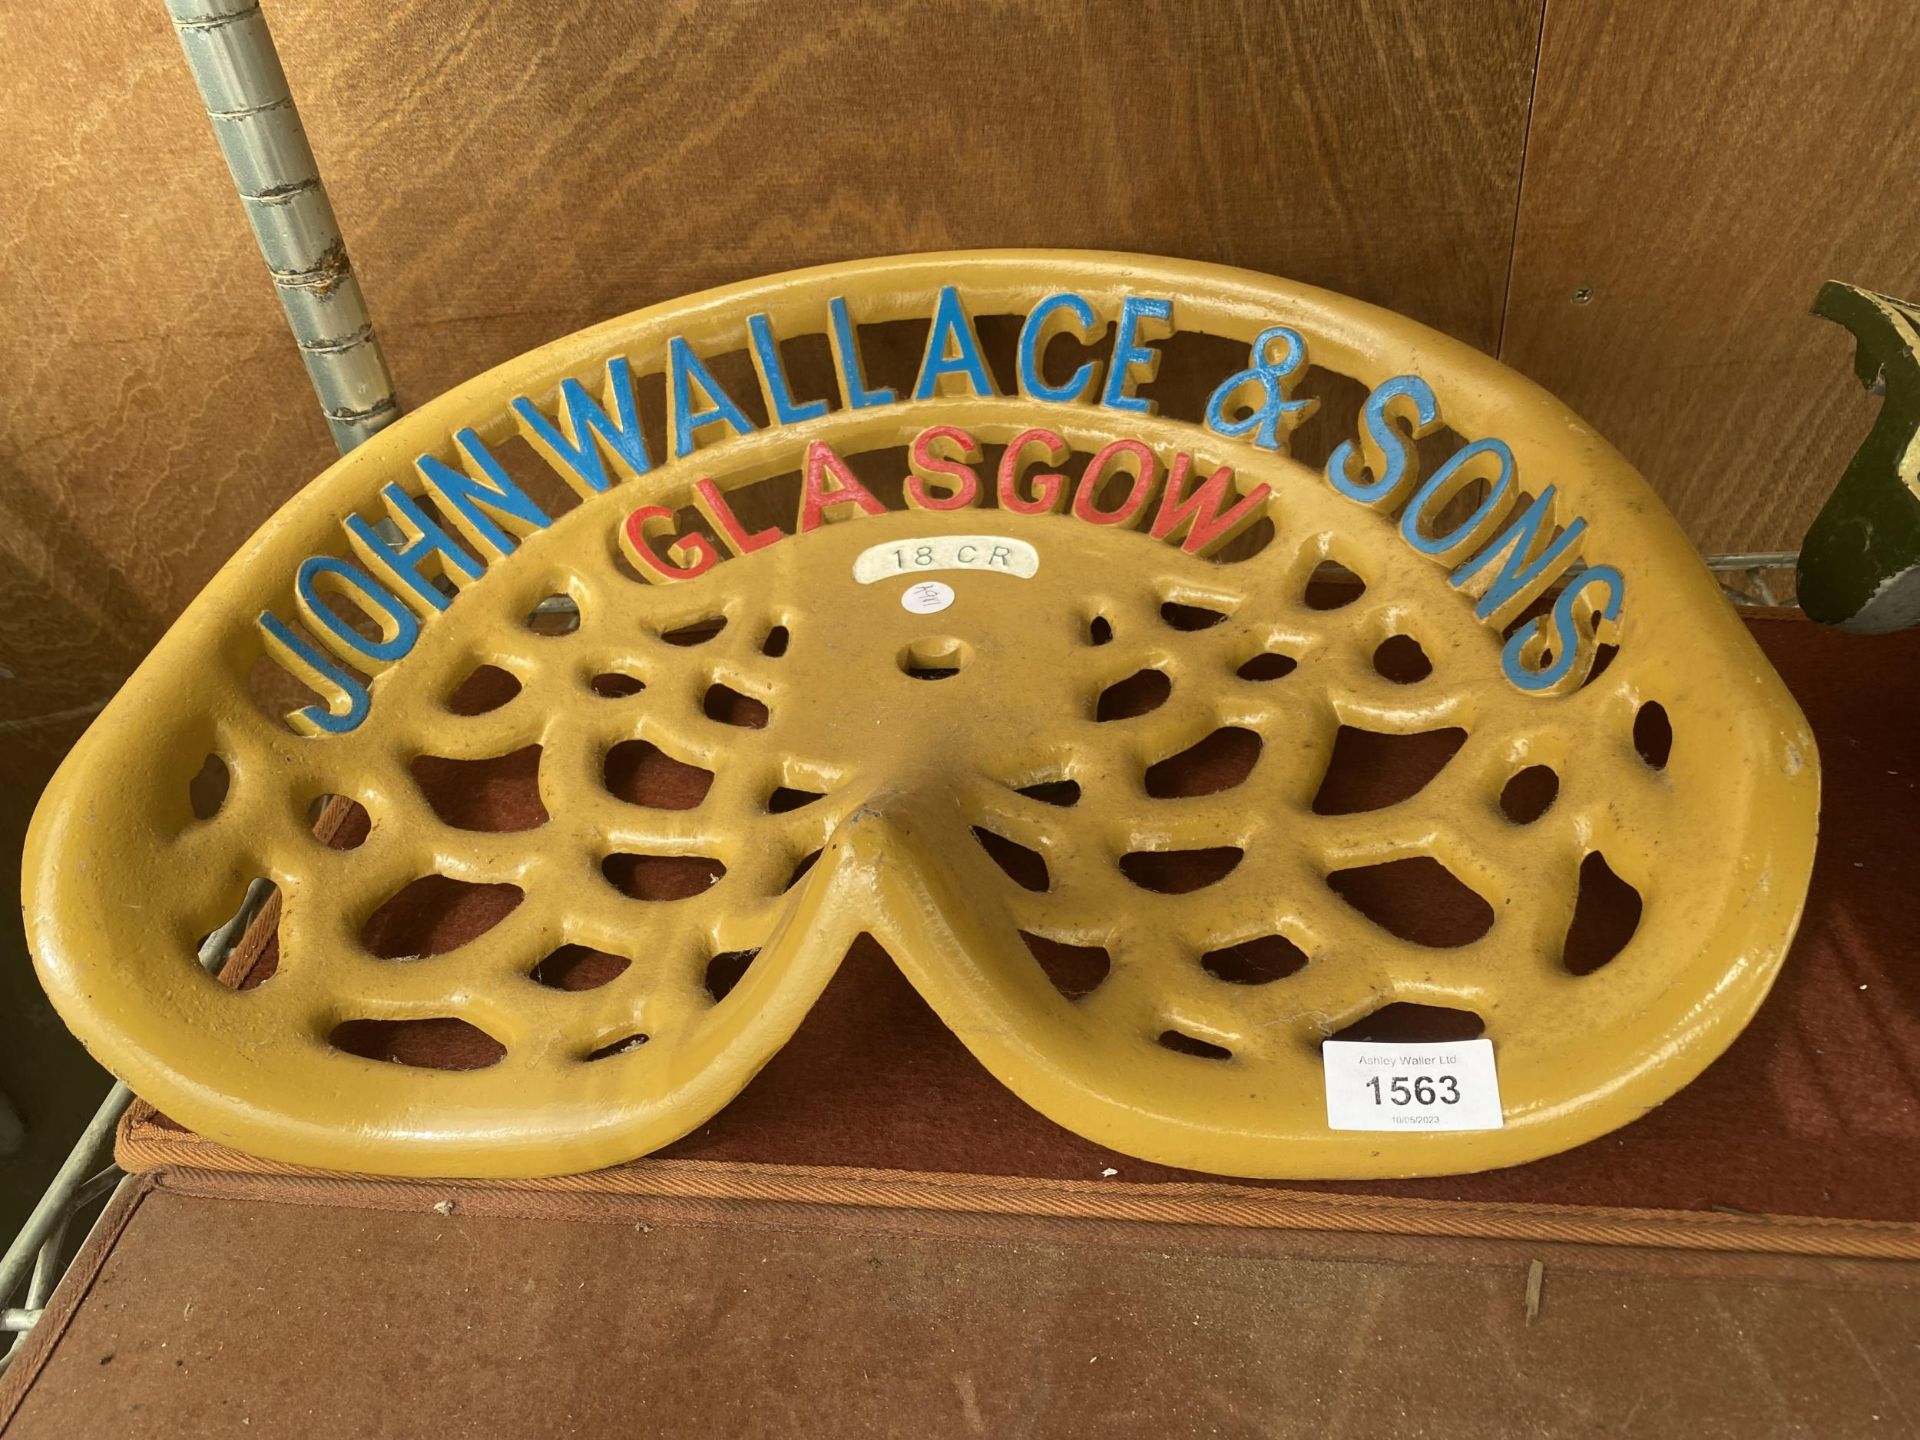 A VINTAGE PAINTED 'JOHN WALLACE & SONS' IMPLEMENT SEAT